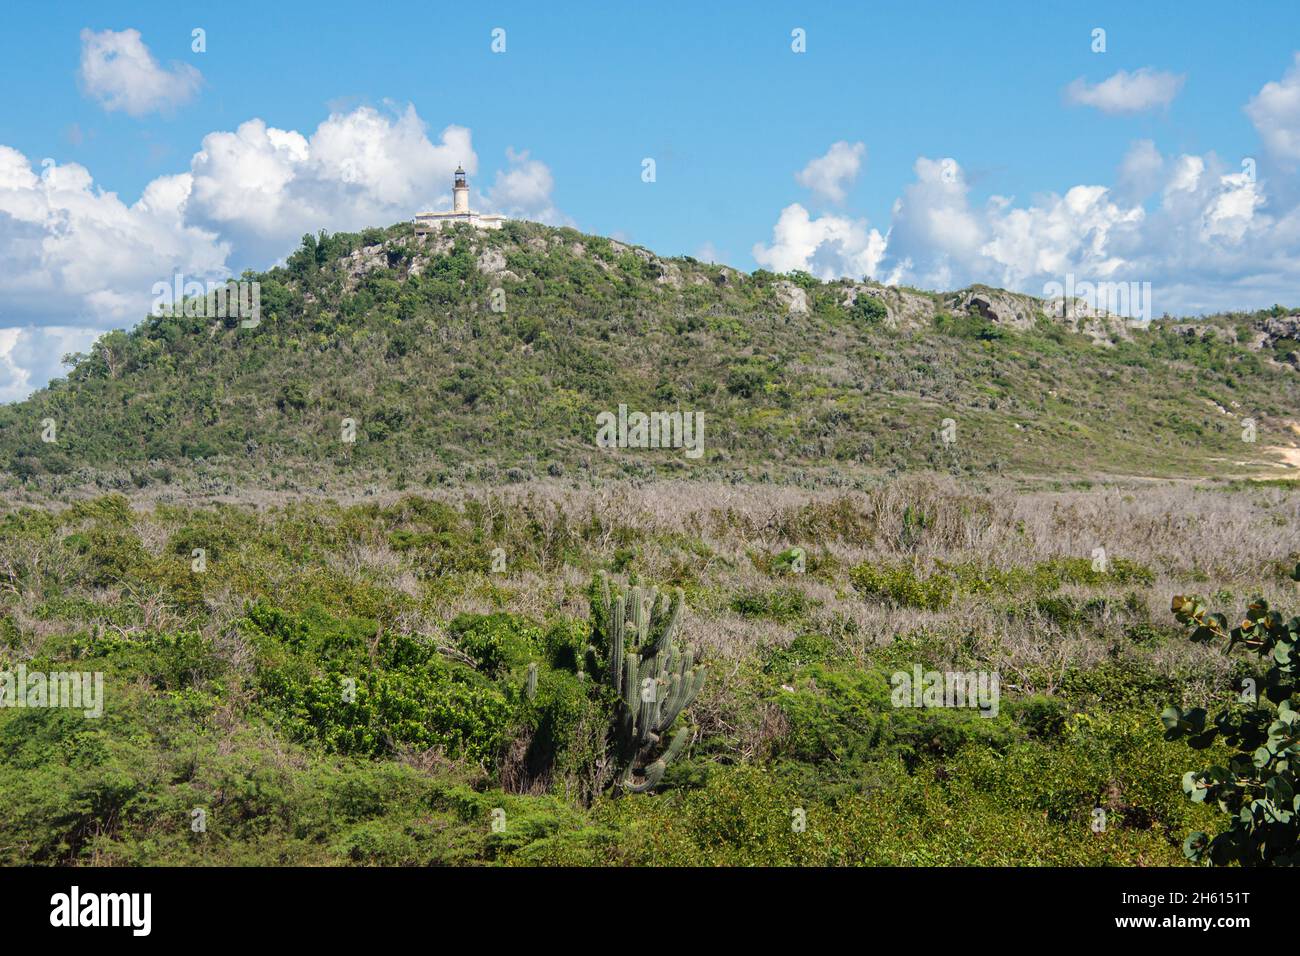 The Caja de Muertos Lighthouse can be seen on the top of a hill on the Island of Caja de Muertos off of the coast of Ponce in Puerto Rico. Stock Photo